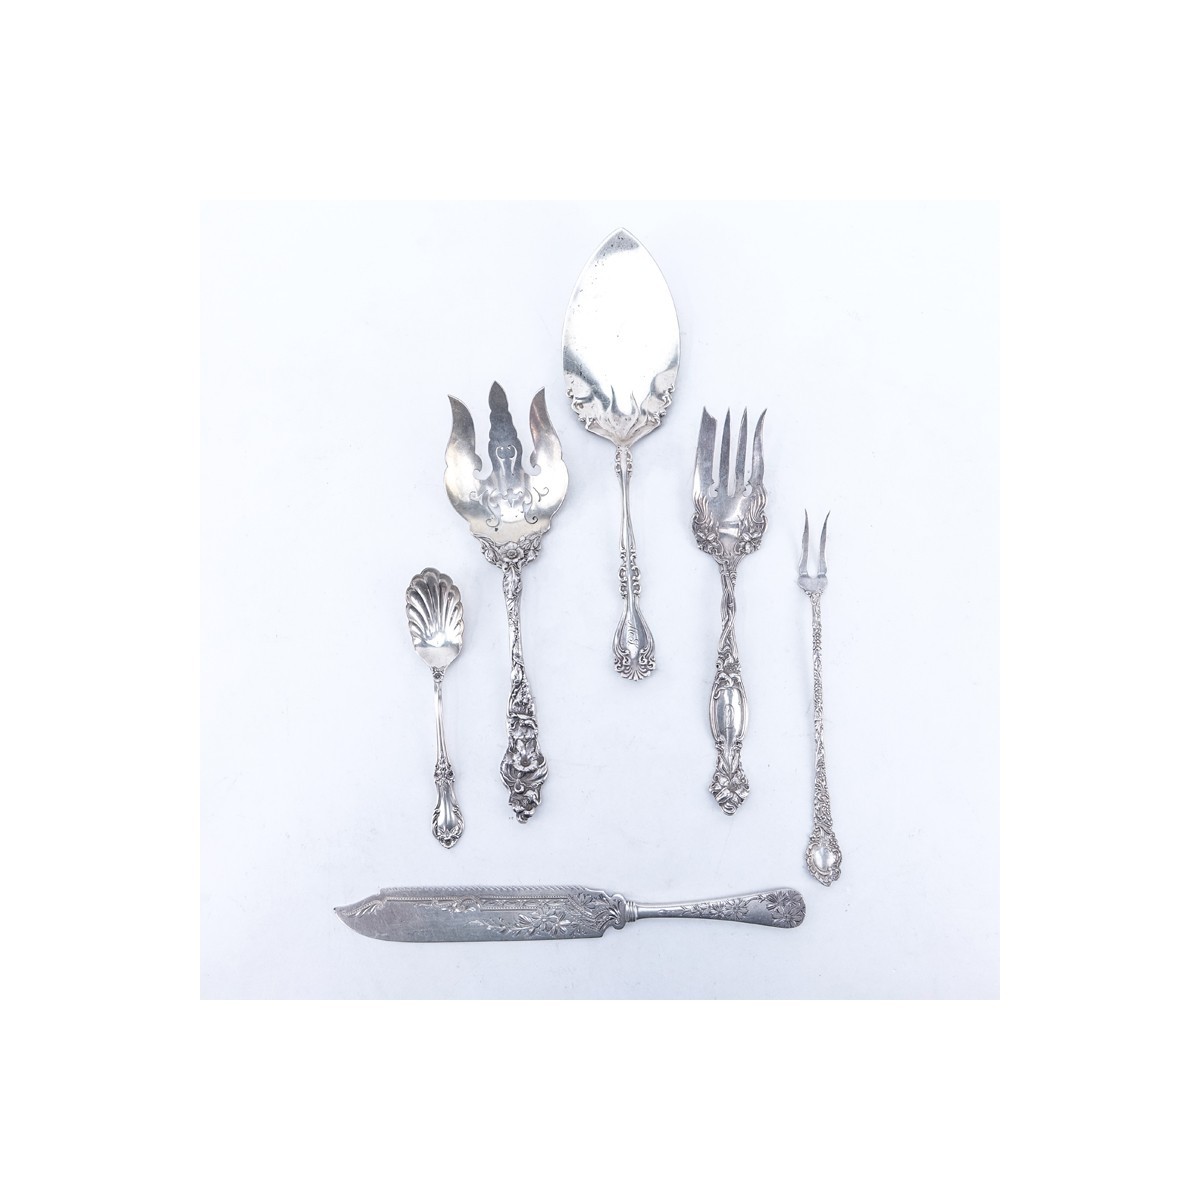 Grouping of Six (6) Antique Sterling Silver: Server 10" L, Shell Bowl Spoon 6-1/8" L, Knife 10-1/4" L, Pierced Serving Fork 9-5/8" L, Serving Fork 8-7/8" L, and Two Tine Serving Fork 8-1/8" L. All appropriately signed.